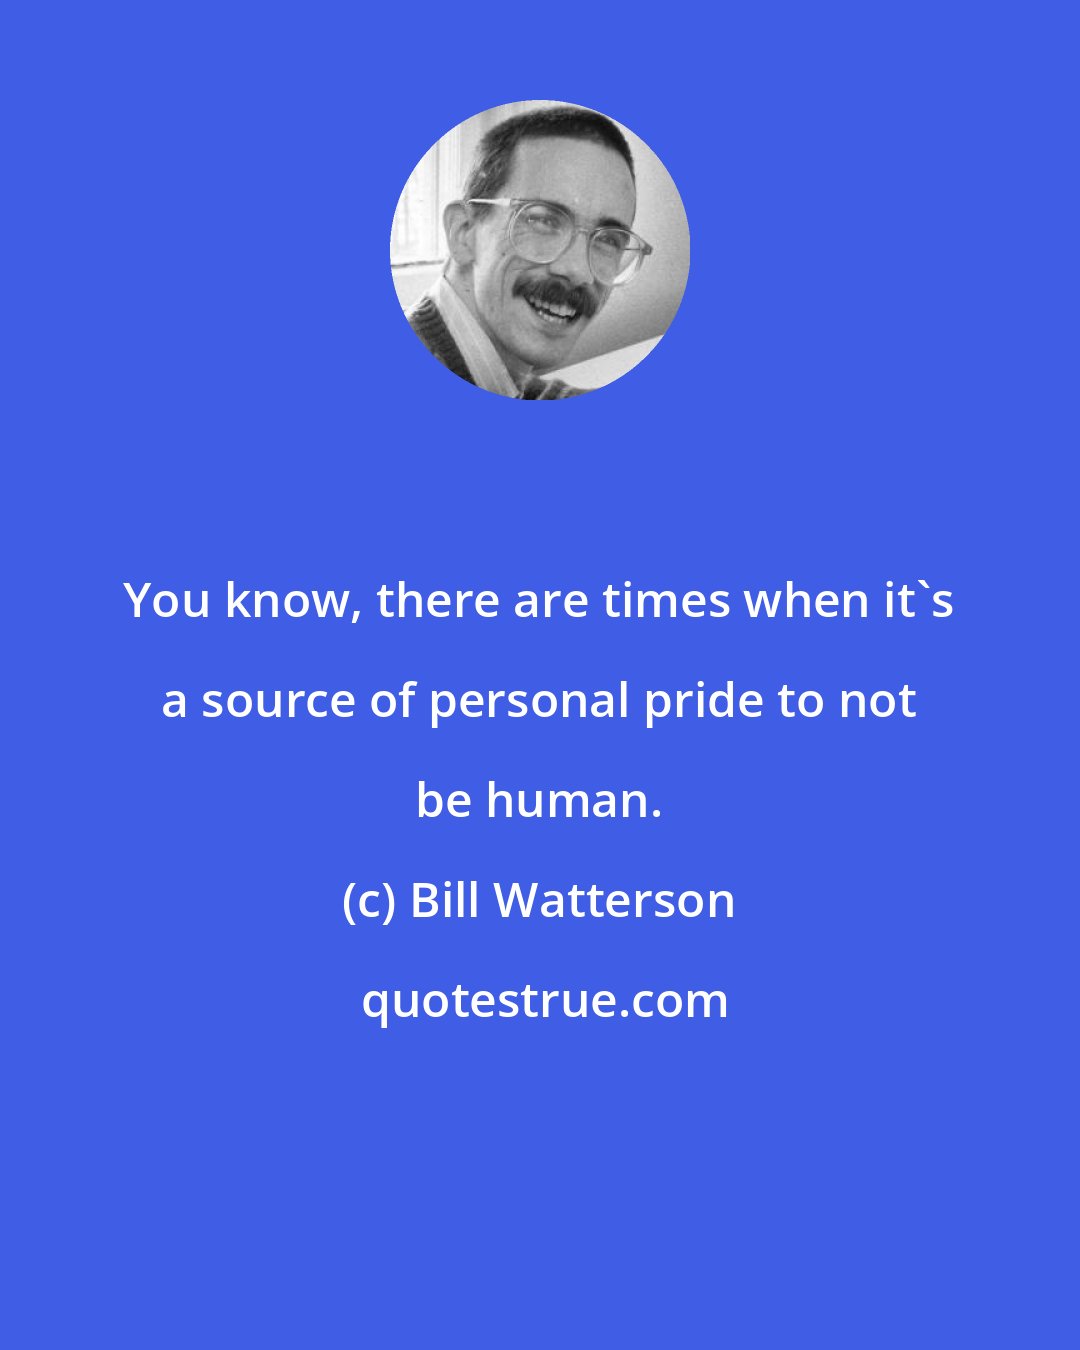 Bill Watterson: You know, there are times when it's a source of personal pride to not be human.